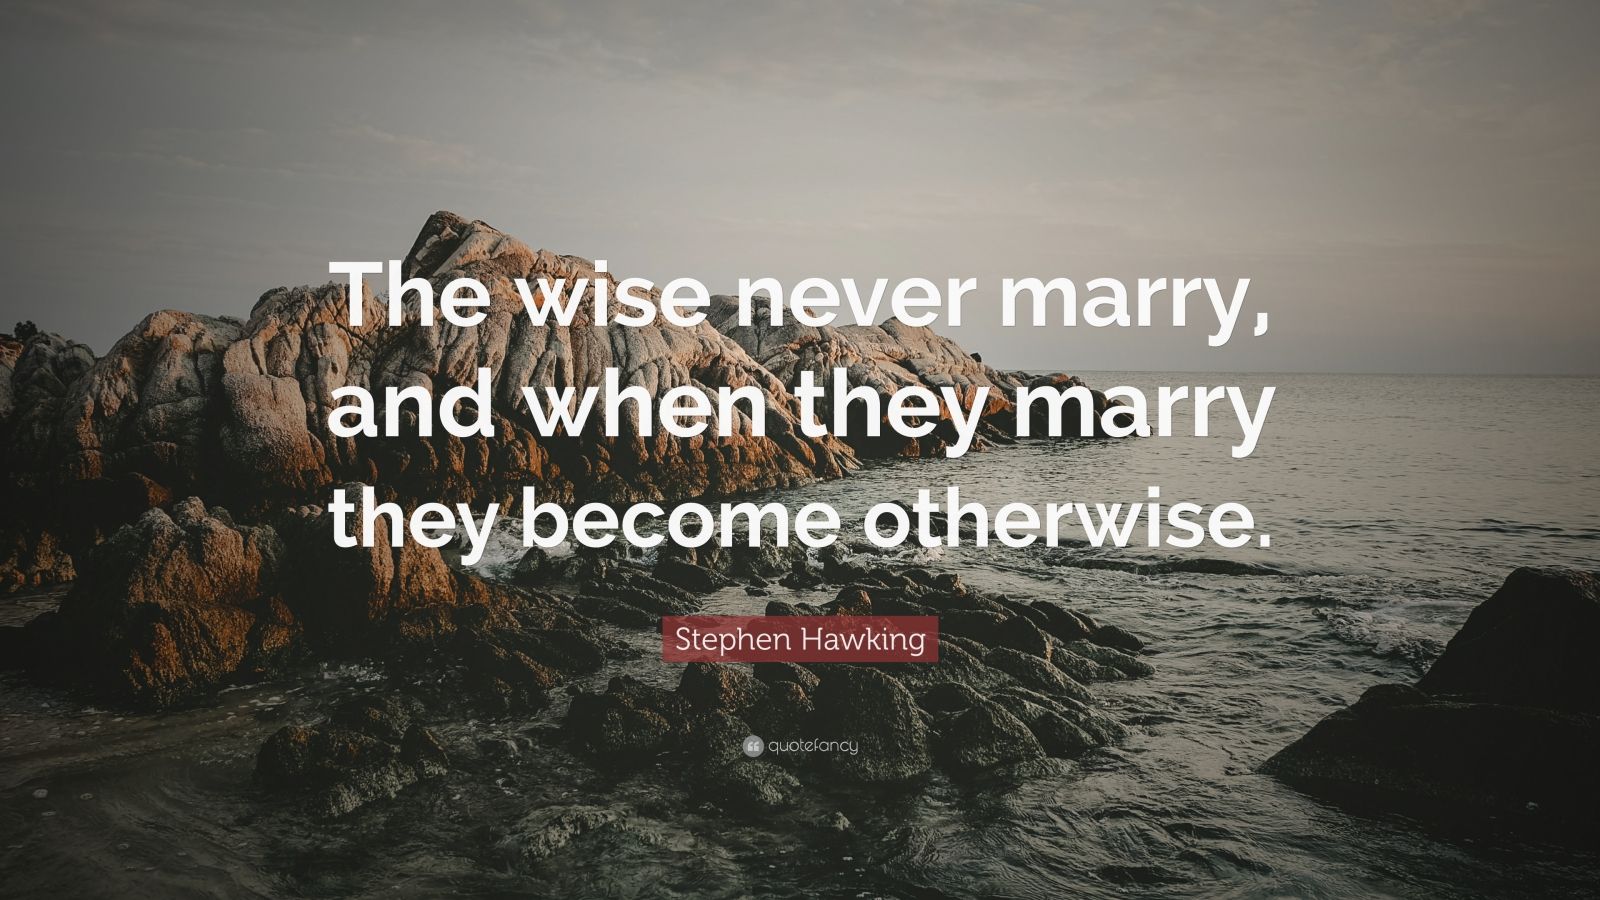 Stephen Hawking Quote: “The wise never marry, and when they marry they